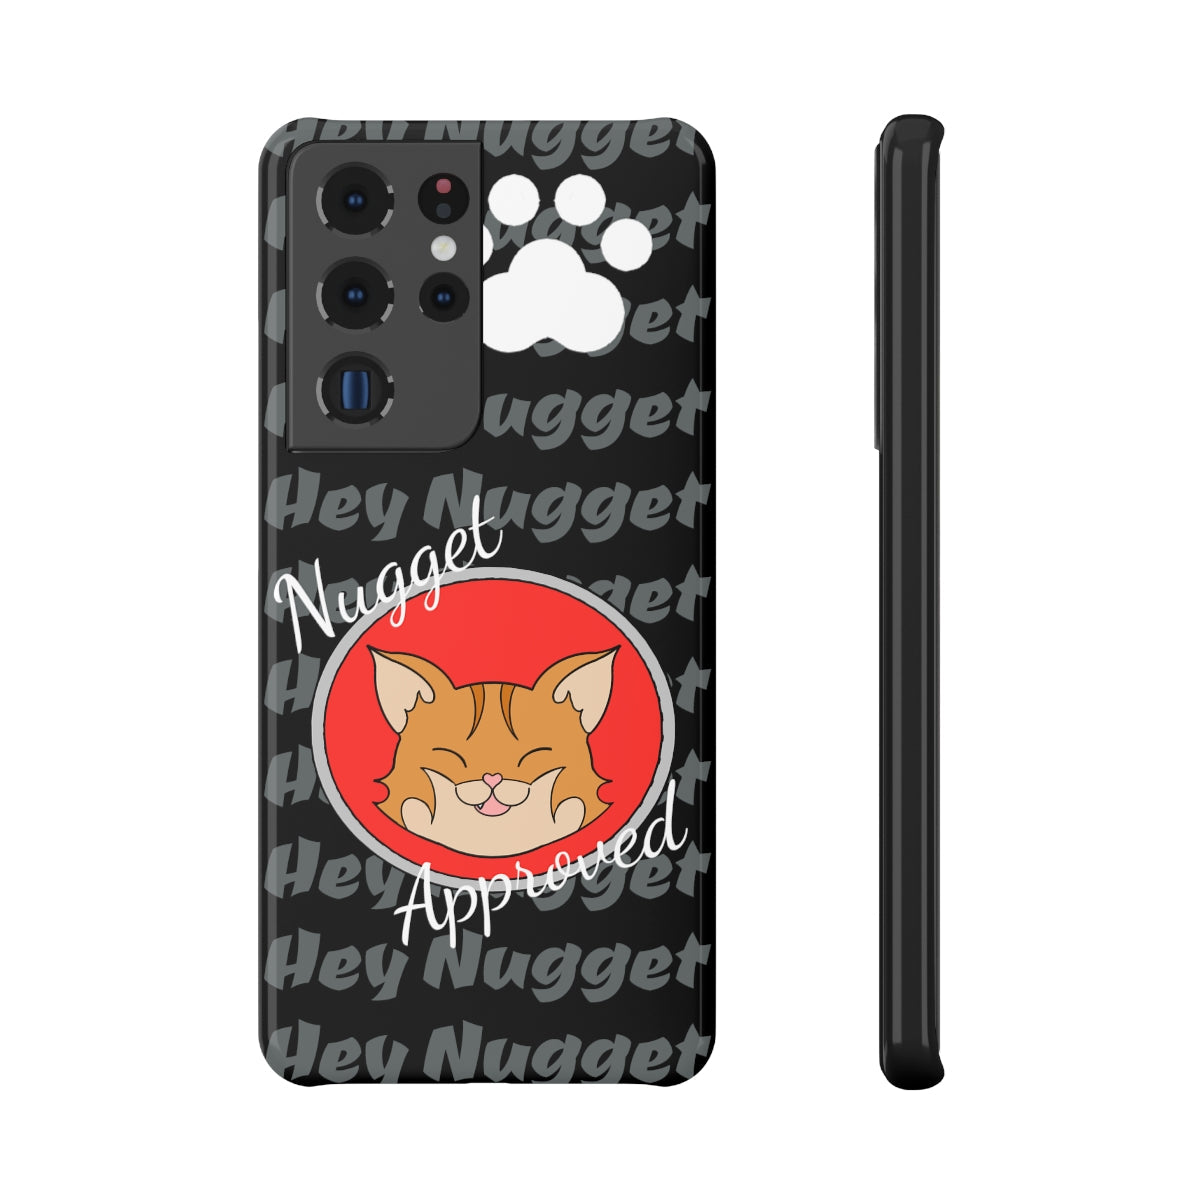 Stand out  with the  Galaxy S21 Slim Snap Case  available at Hey Nugget. Grab yours today!